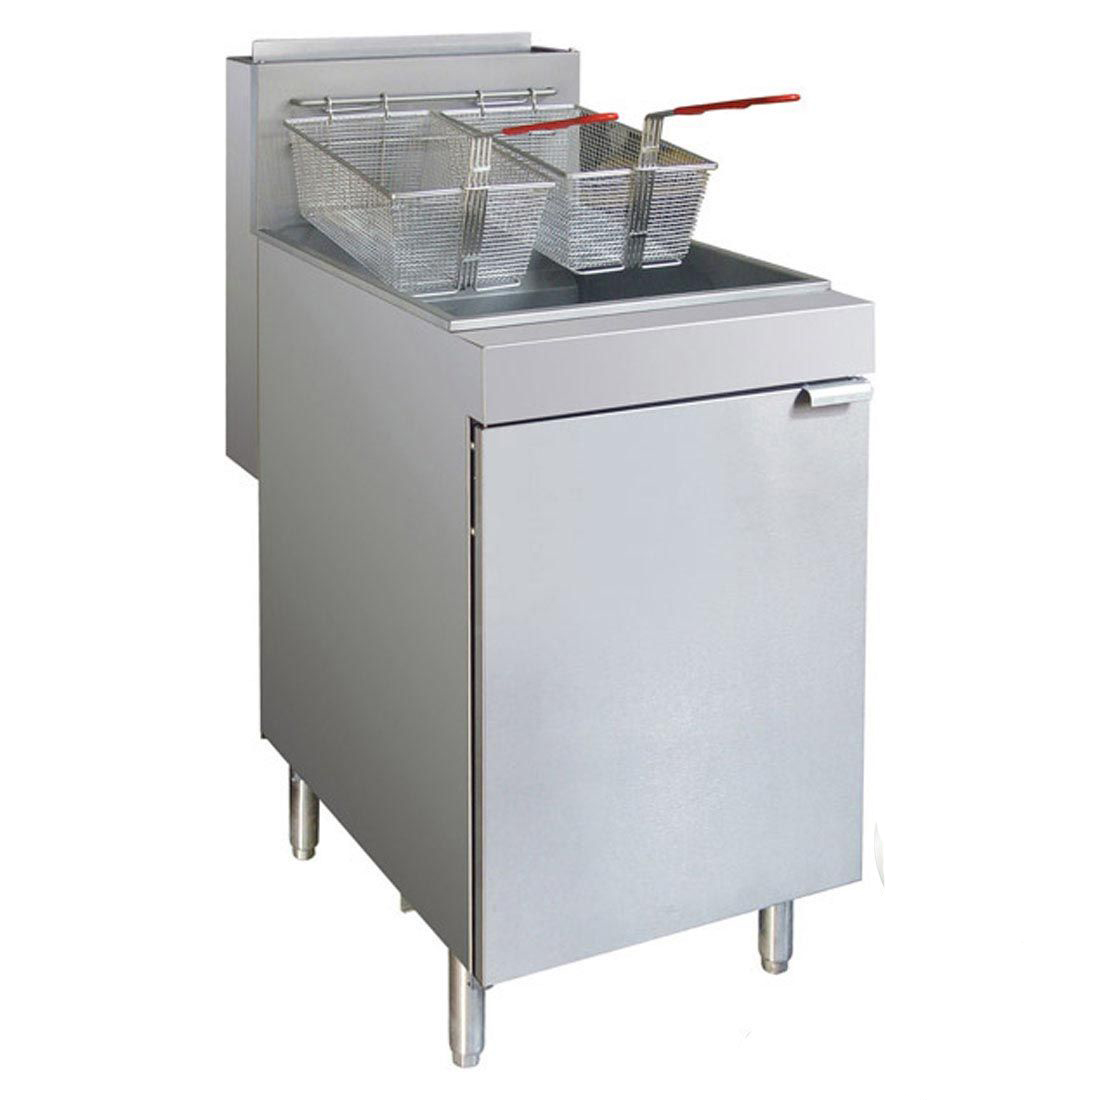 RC300E - Superfast Natural Gas Tube Fryer